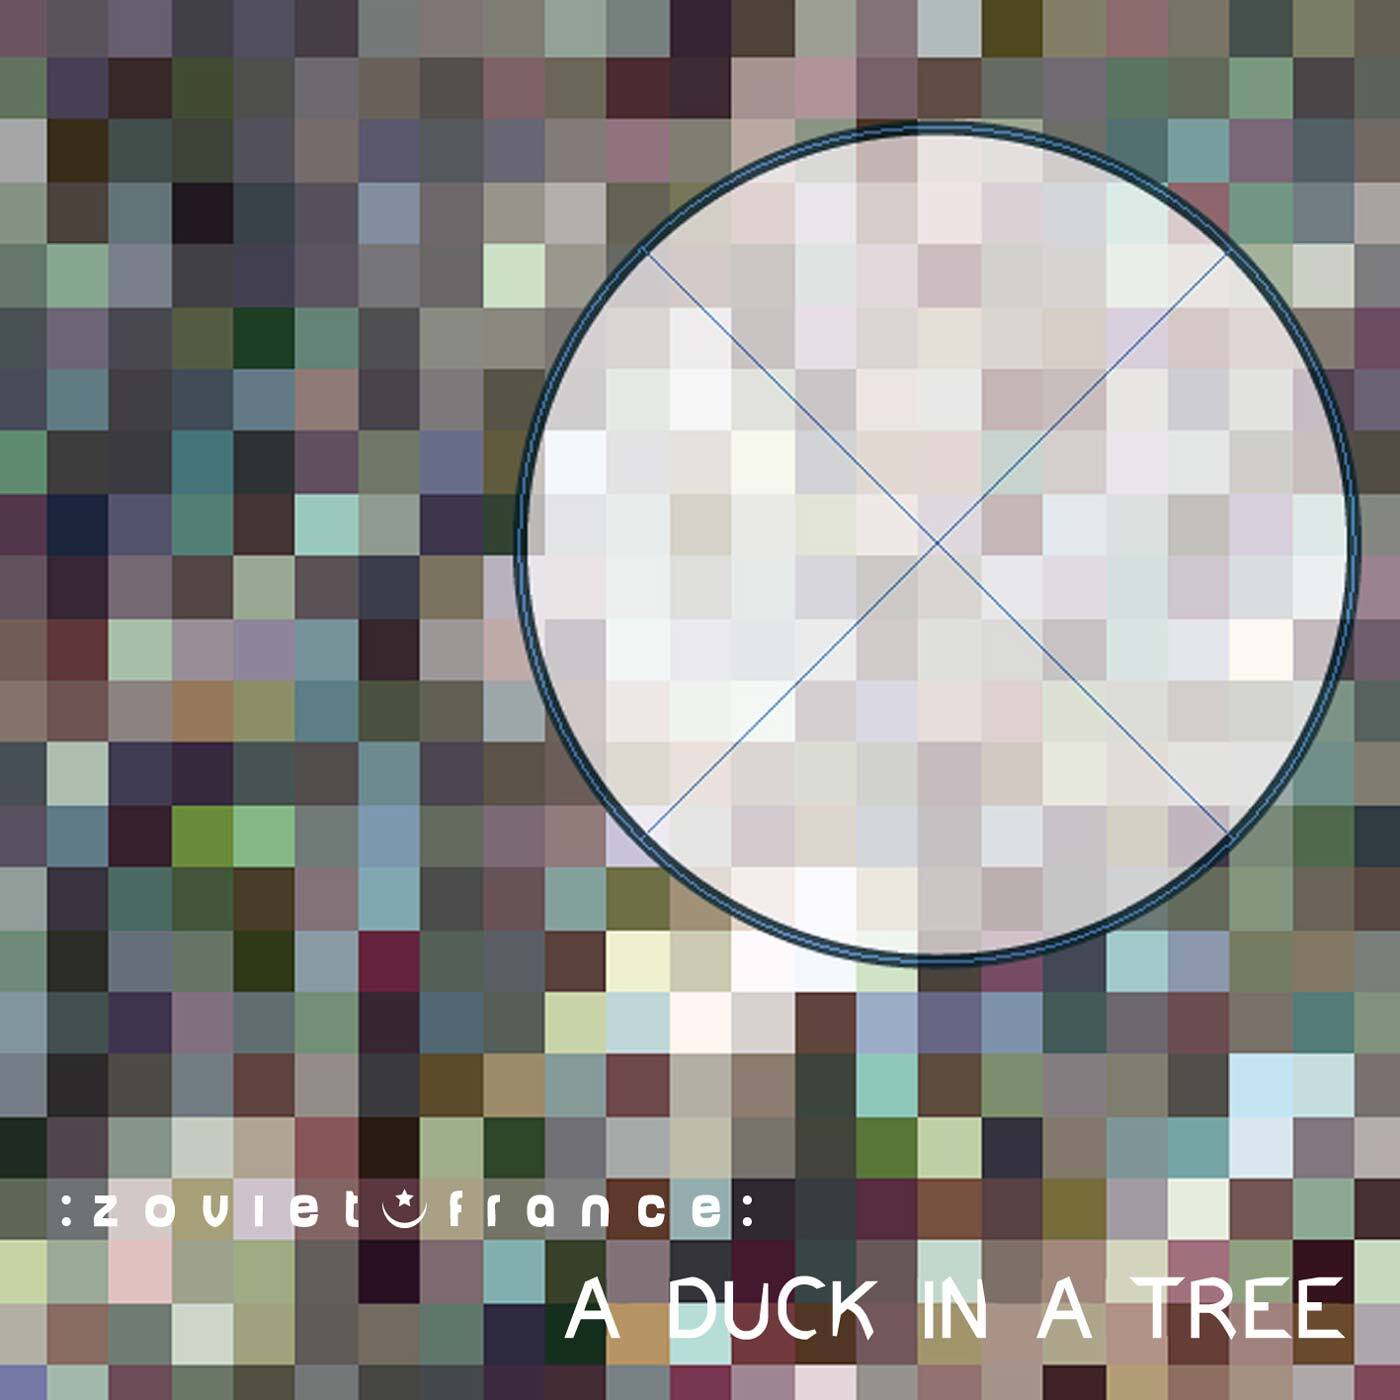 A-Duck-in-a-Tree-2014-05-03-_-Time-in-a-